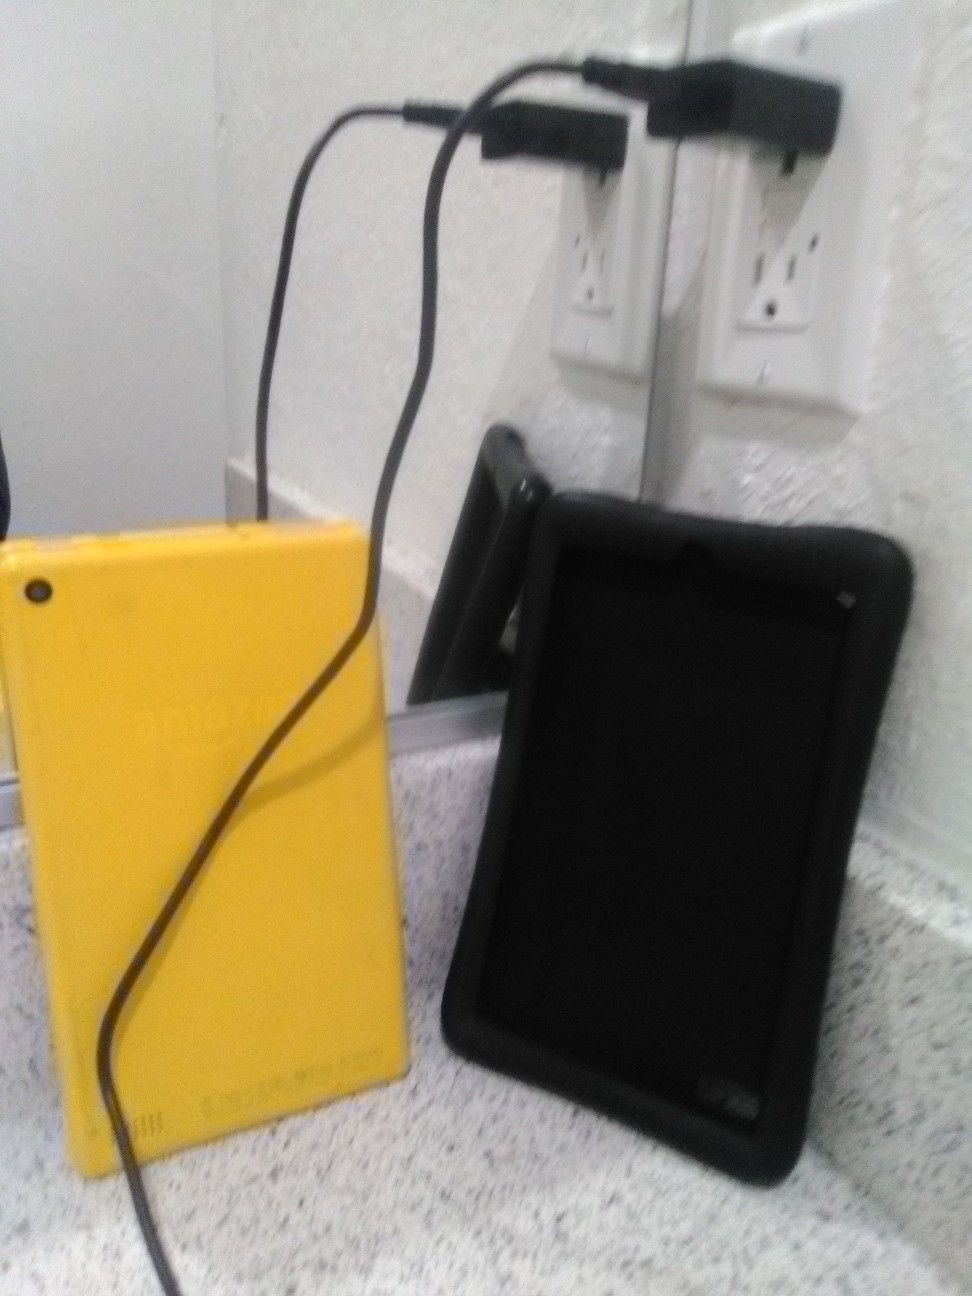 Amazon Fire Tablet w/black case and charger